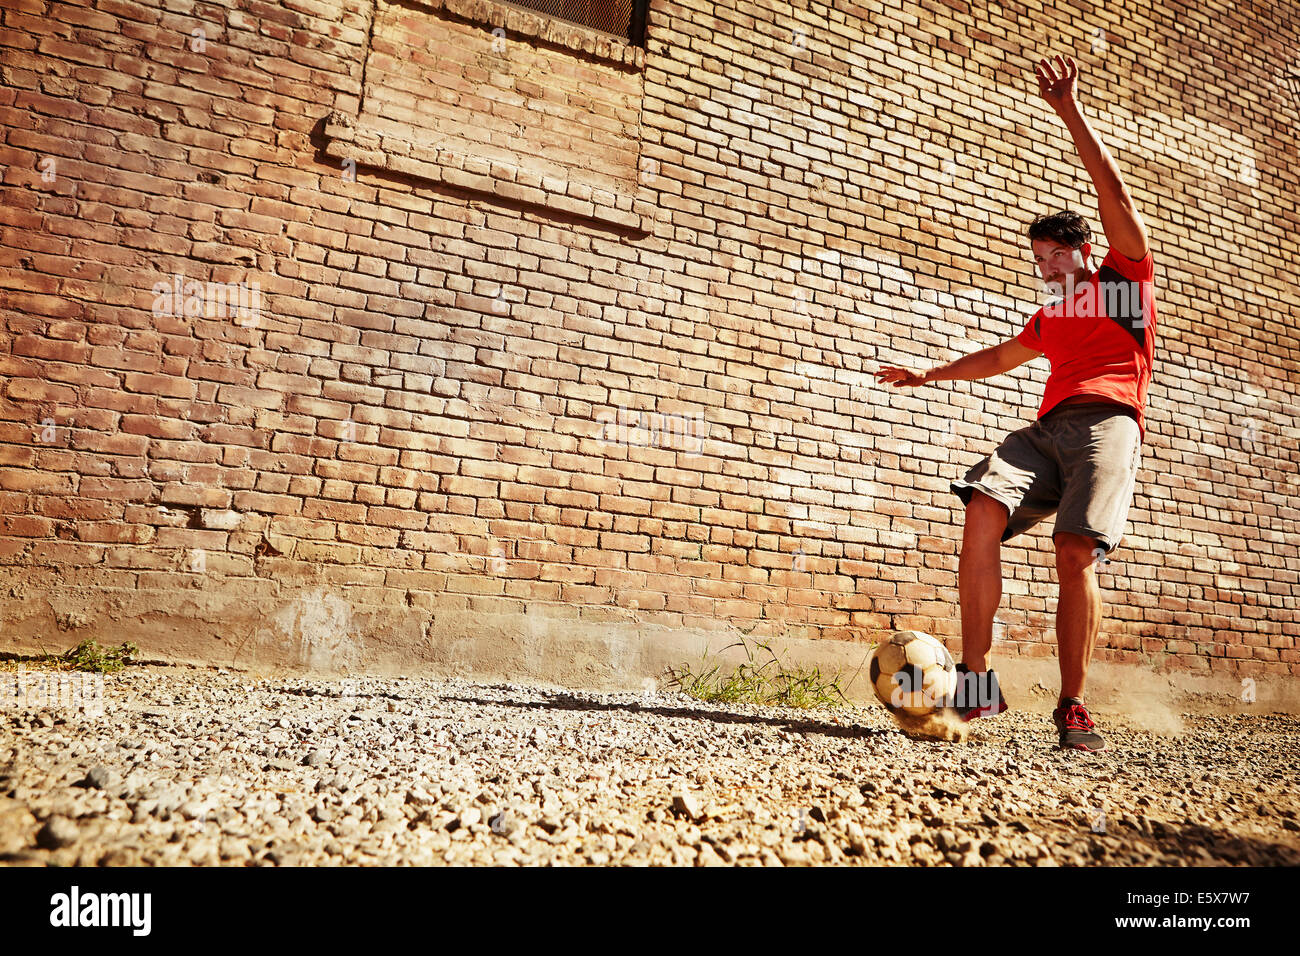 Young man playing soccer on wasteland Stock Photo